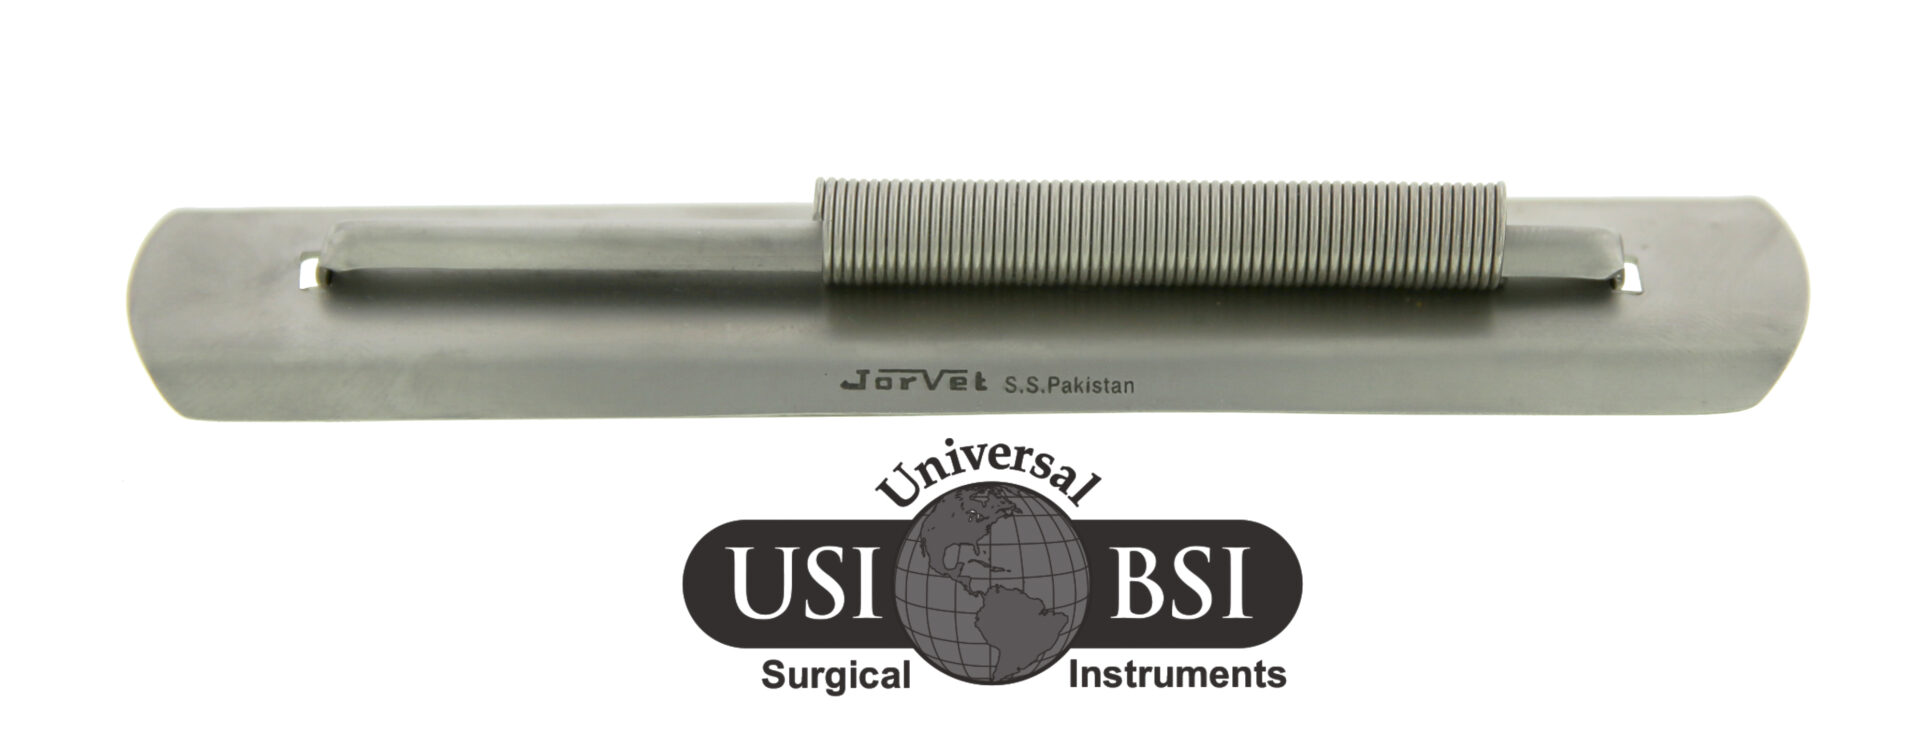 A picture of the logo for surgical instruments.